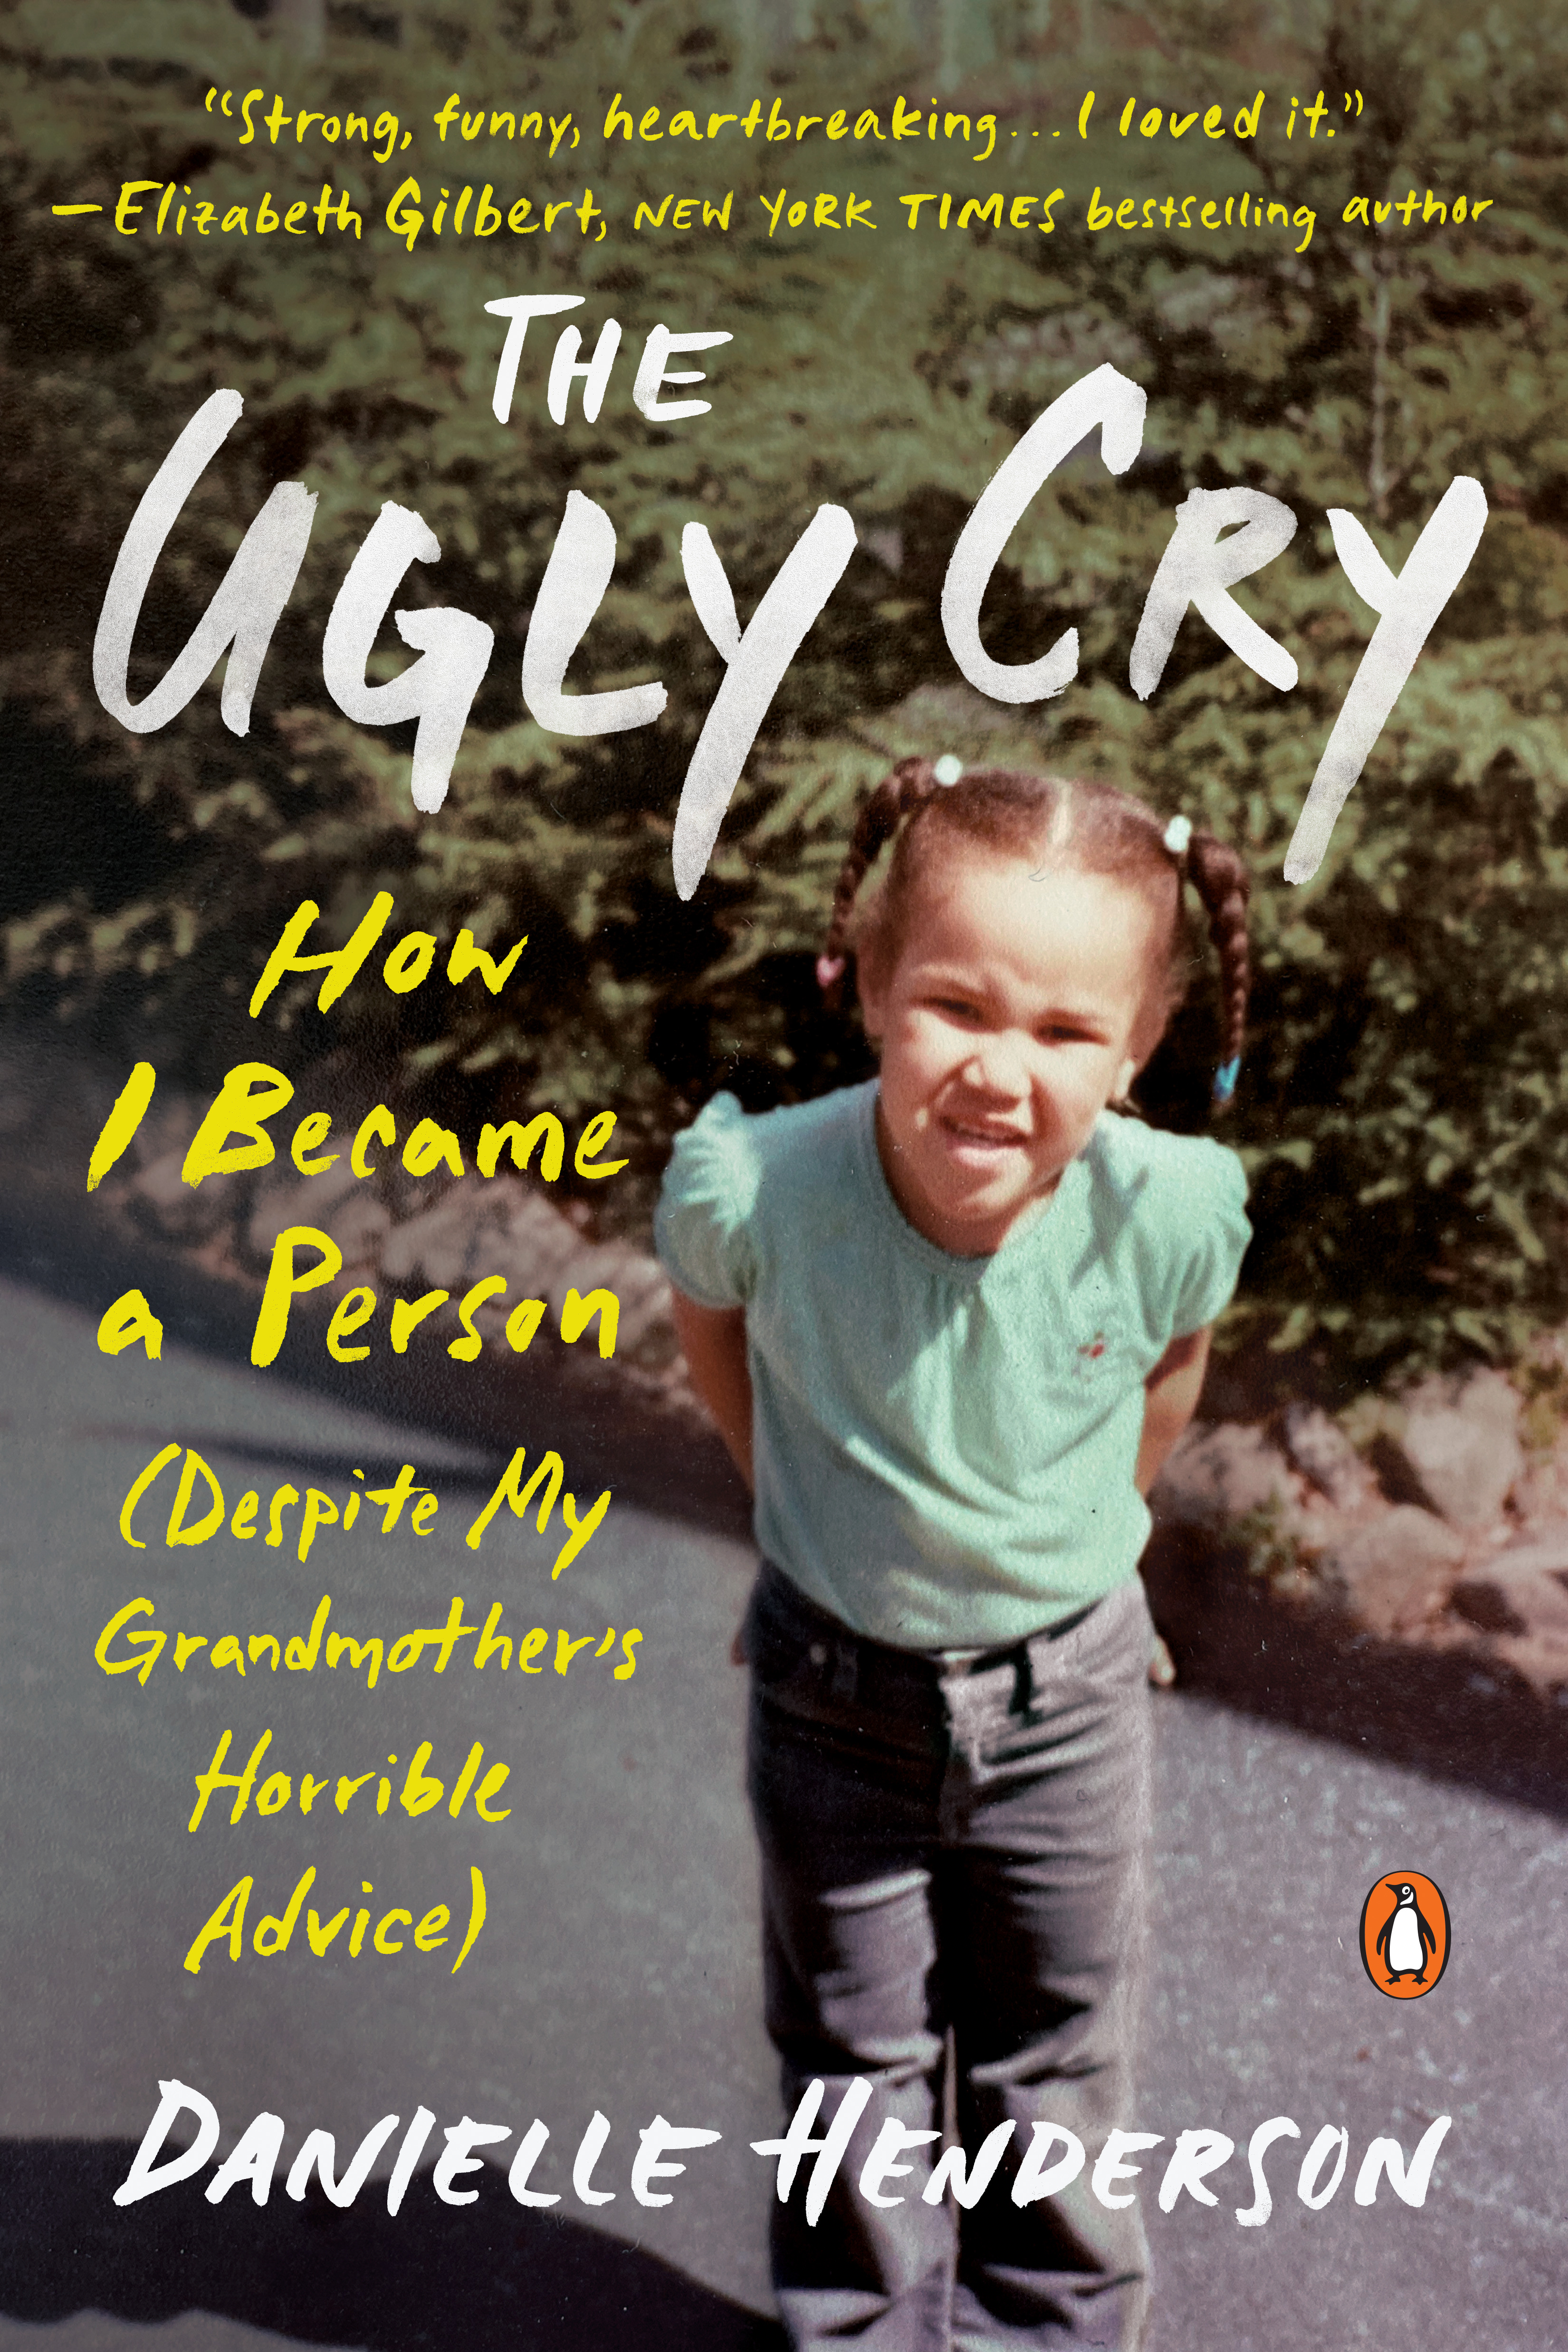 The Ugly Cry : How I Became a Person (Despite My Grandmother's Horrible Advice) | Henderson, Danielle